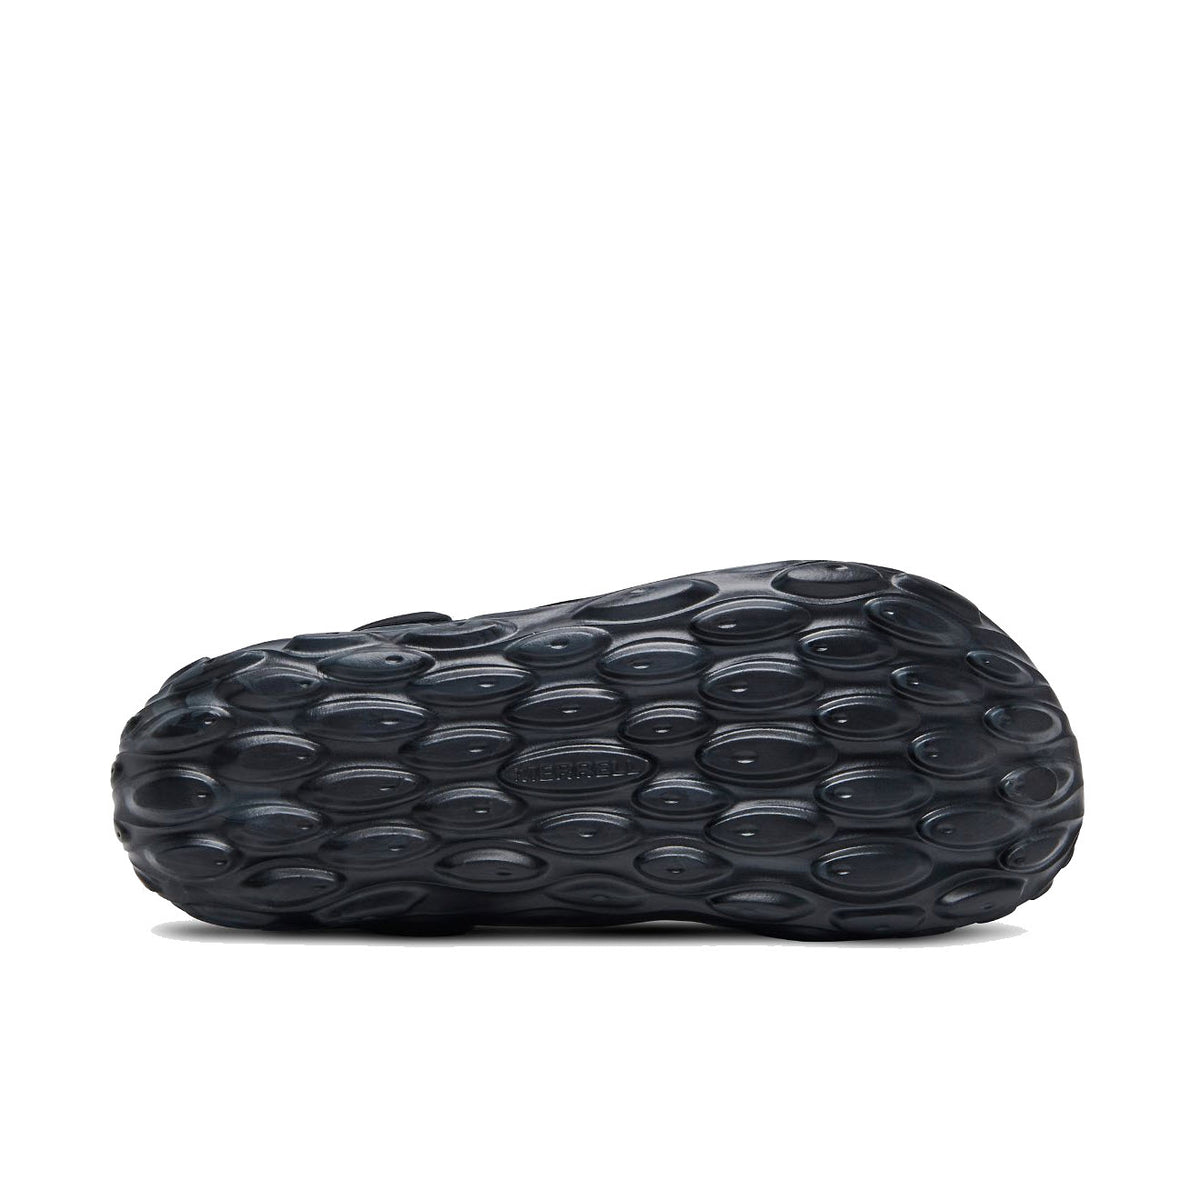 Merrell black sneaker sole with circular tread pattern and a brand label embedded near the heel, crafted from water-friendly EVA foam.